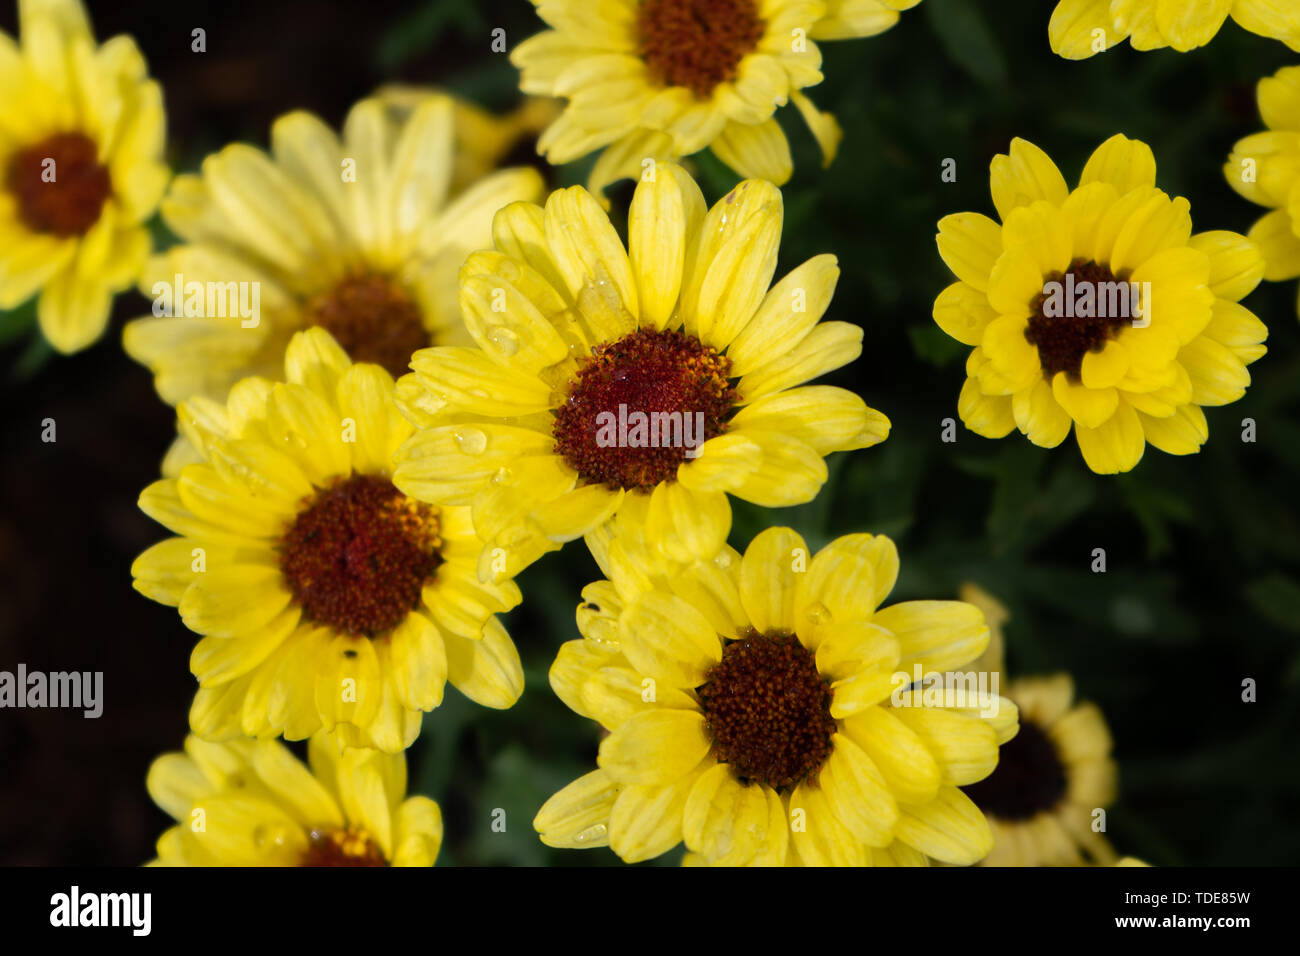 The flower is a small shrub 30-120 cm tall. The flowers are single flowers. The flowers are yellow. In the center of the flower is reddish brown. Stock Photo